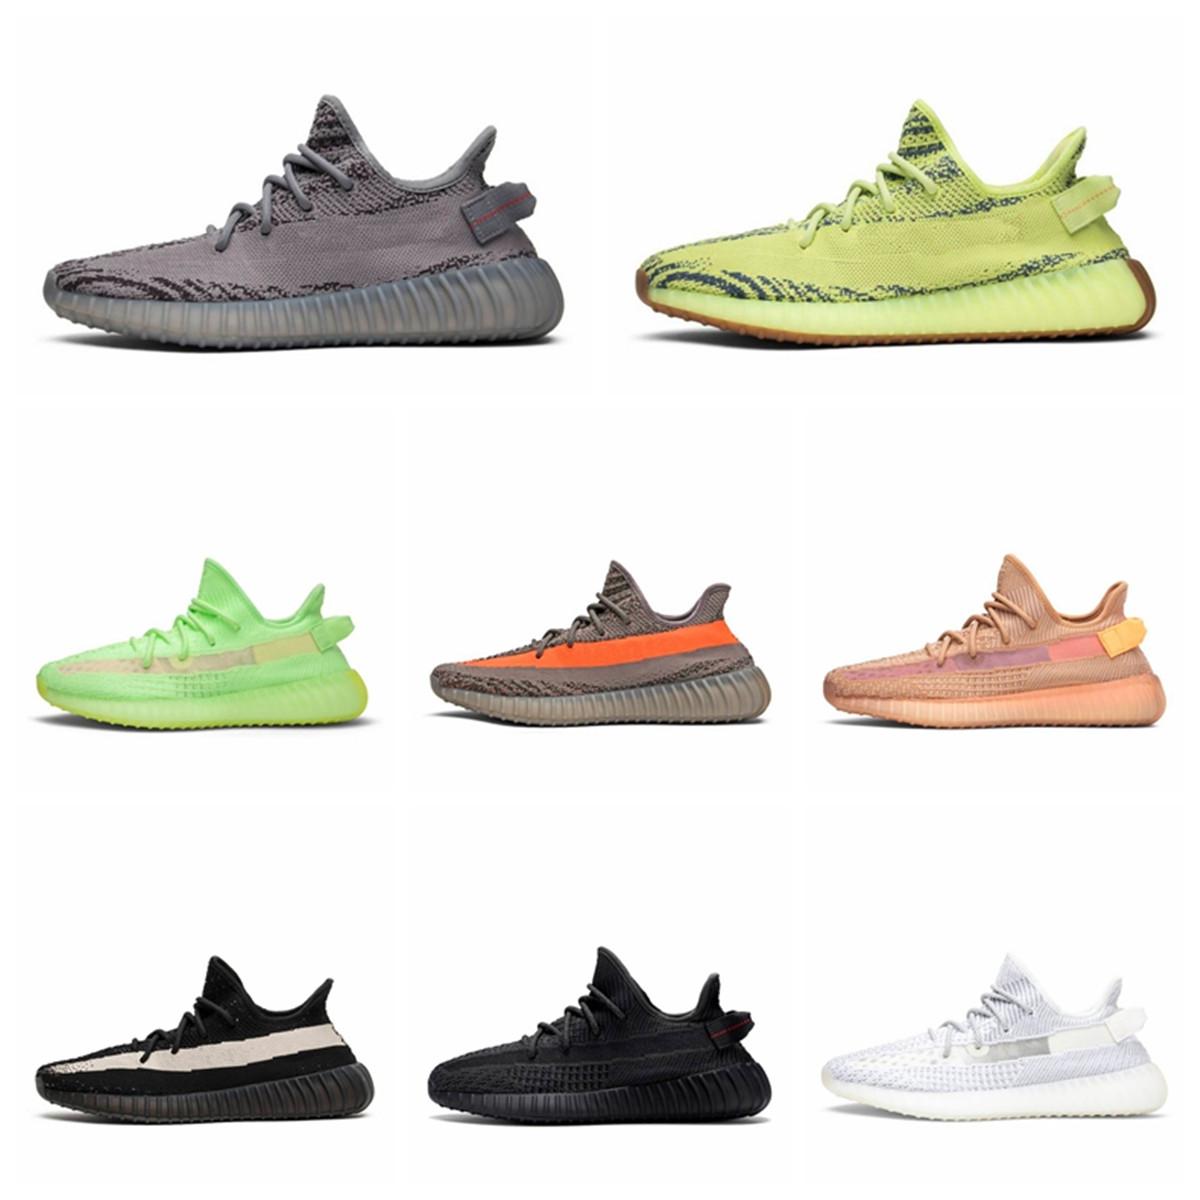 

Mens Shoes Blue Tint 35 V2 V1 Sneakers Moonrock Black Size 13 Womens Sport Casual 2018 Shoes for Men Zebre Oreo Br AcF YEZZIES YEEZIES BOOST, Standard size